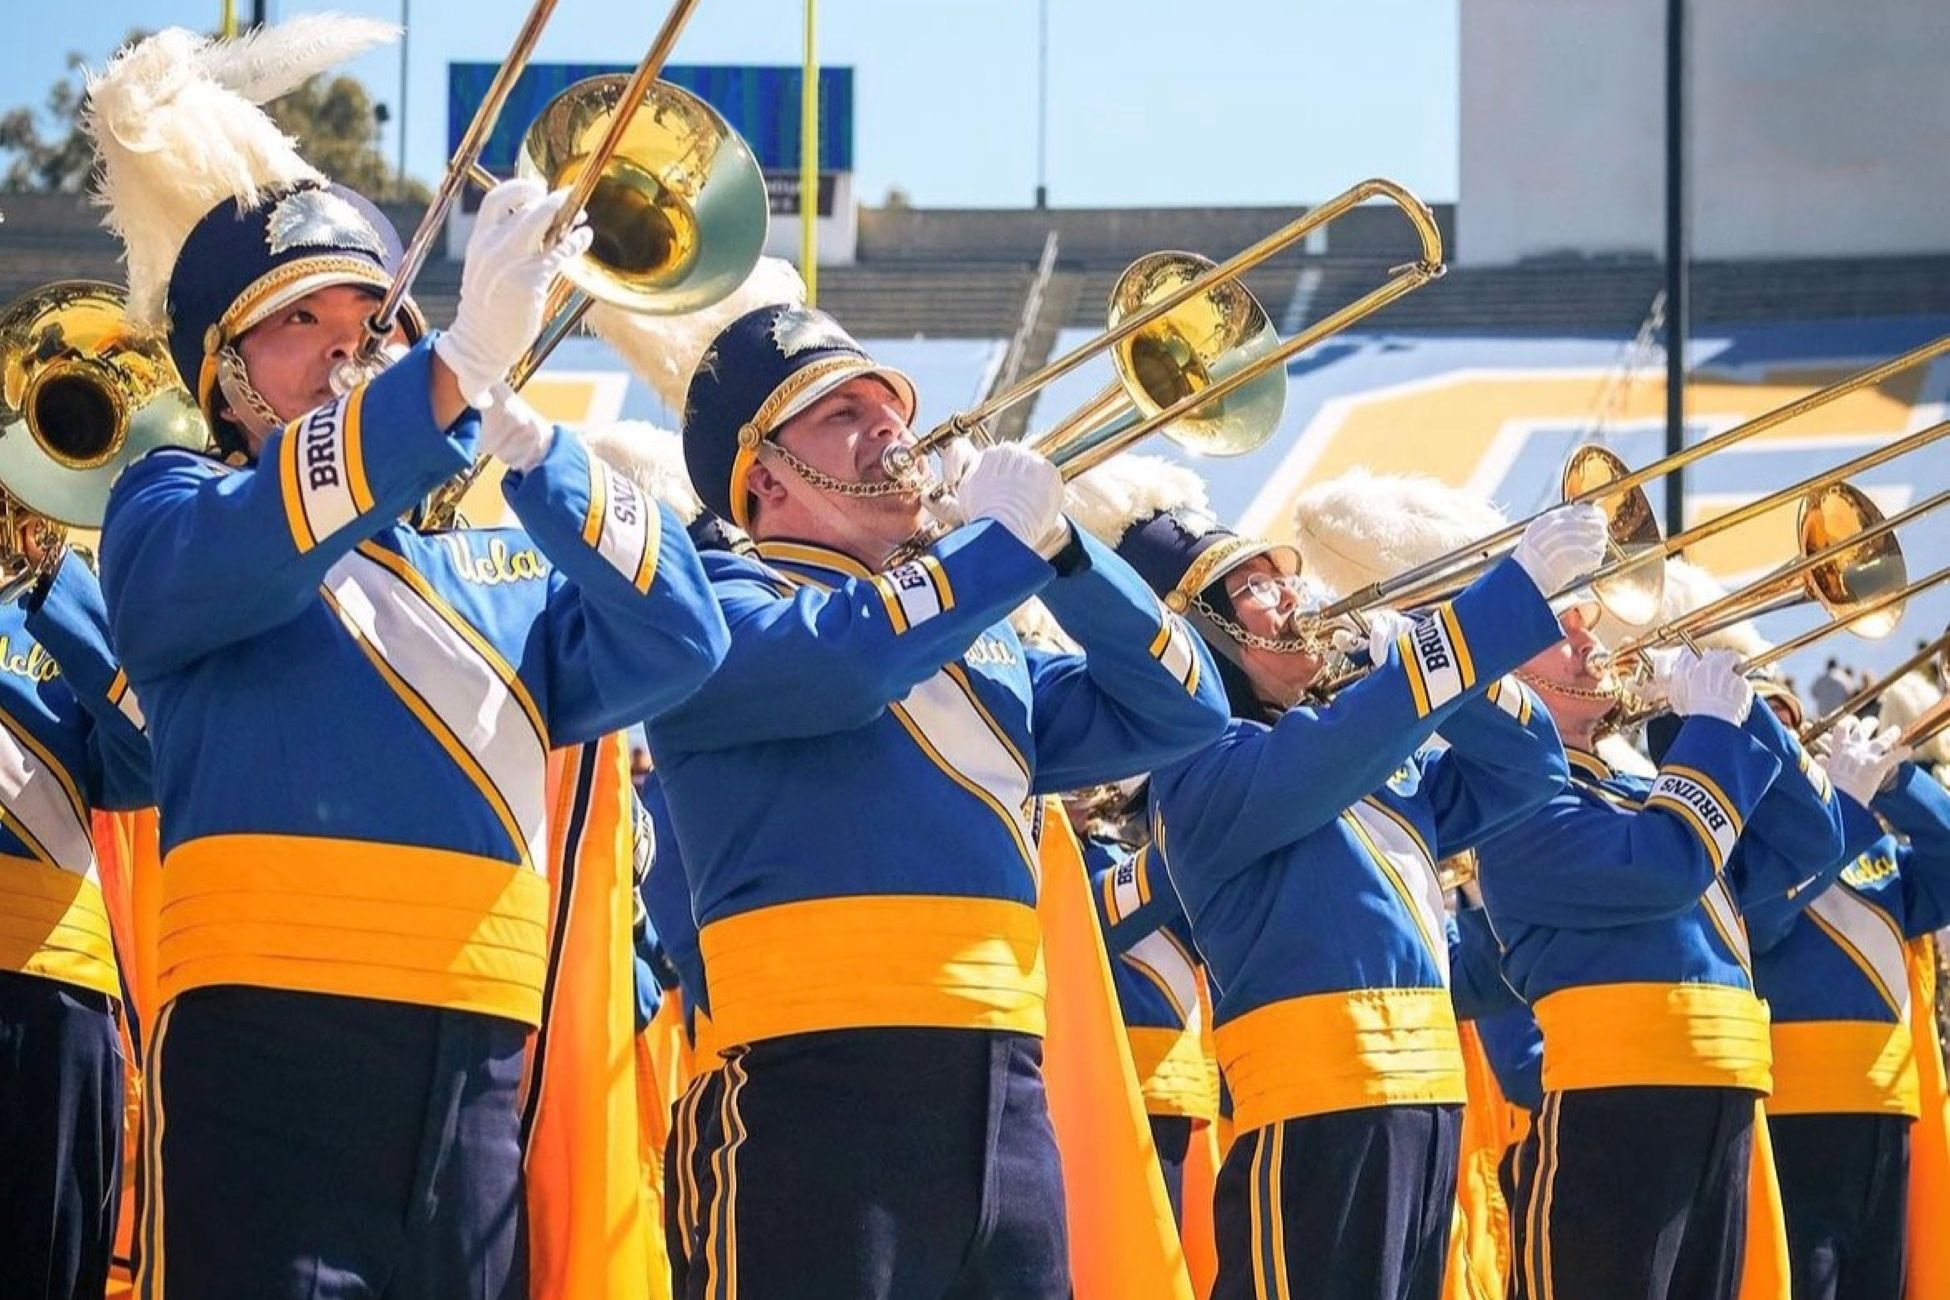 Row of trombone players in blue and gold band uniforms perform at Rose Bowl 